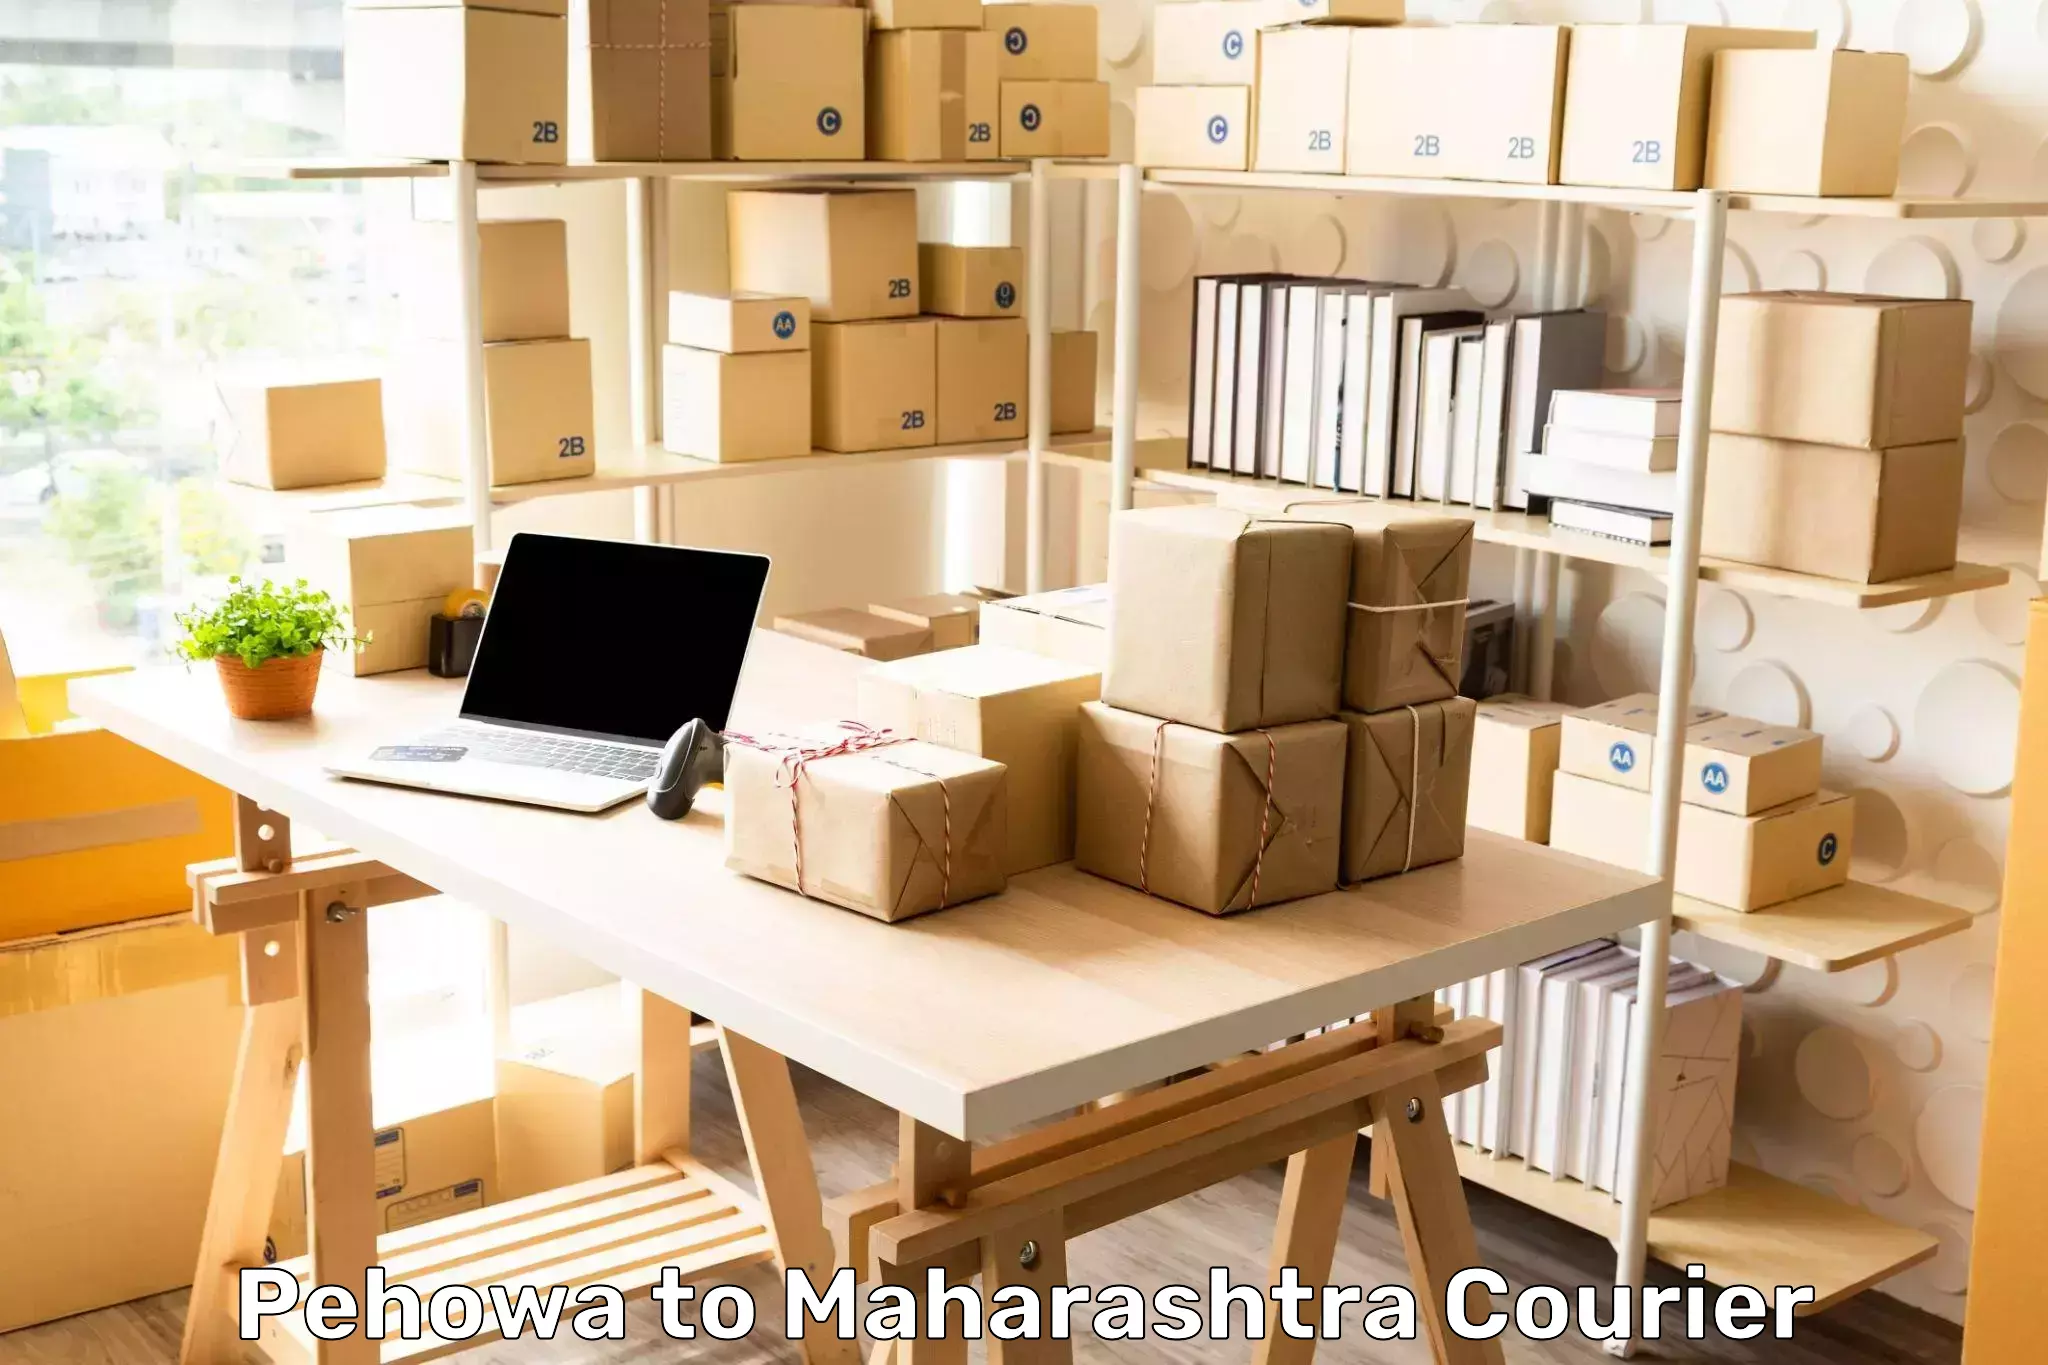 Customer-oriented courier services Pehowa to Khandala Pune